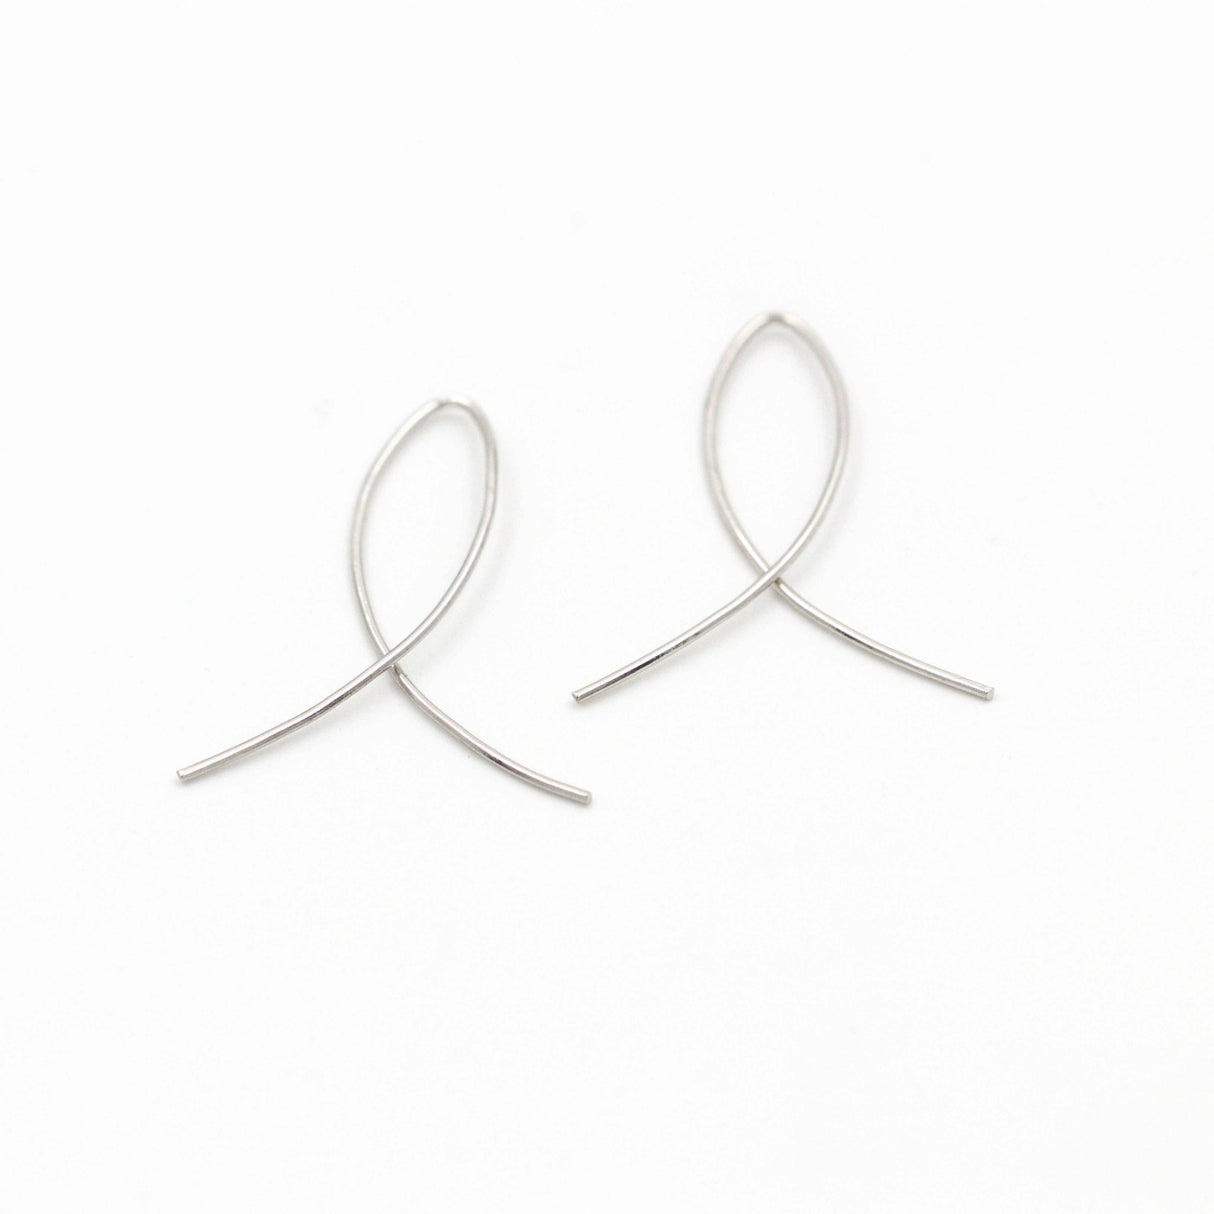 Stunning Silver Curved Bar Earrings